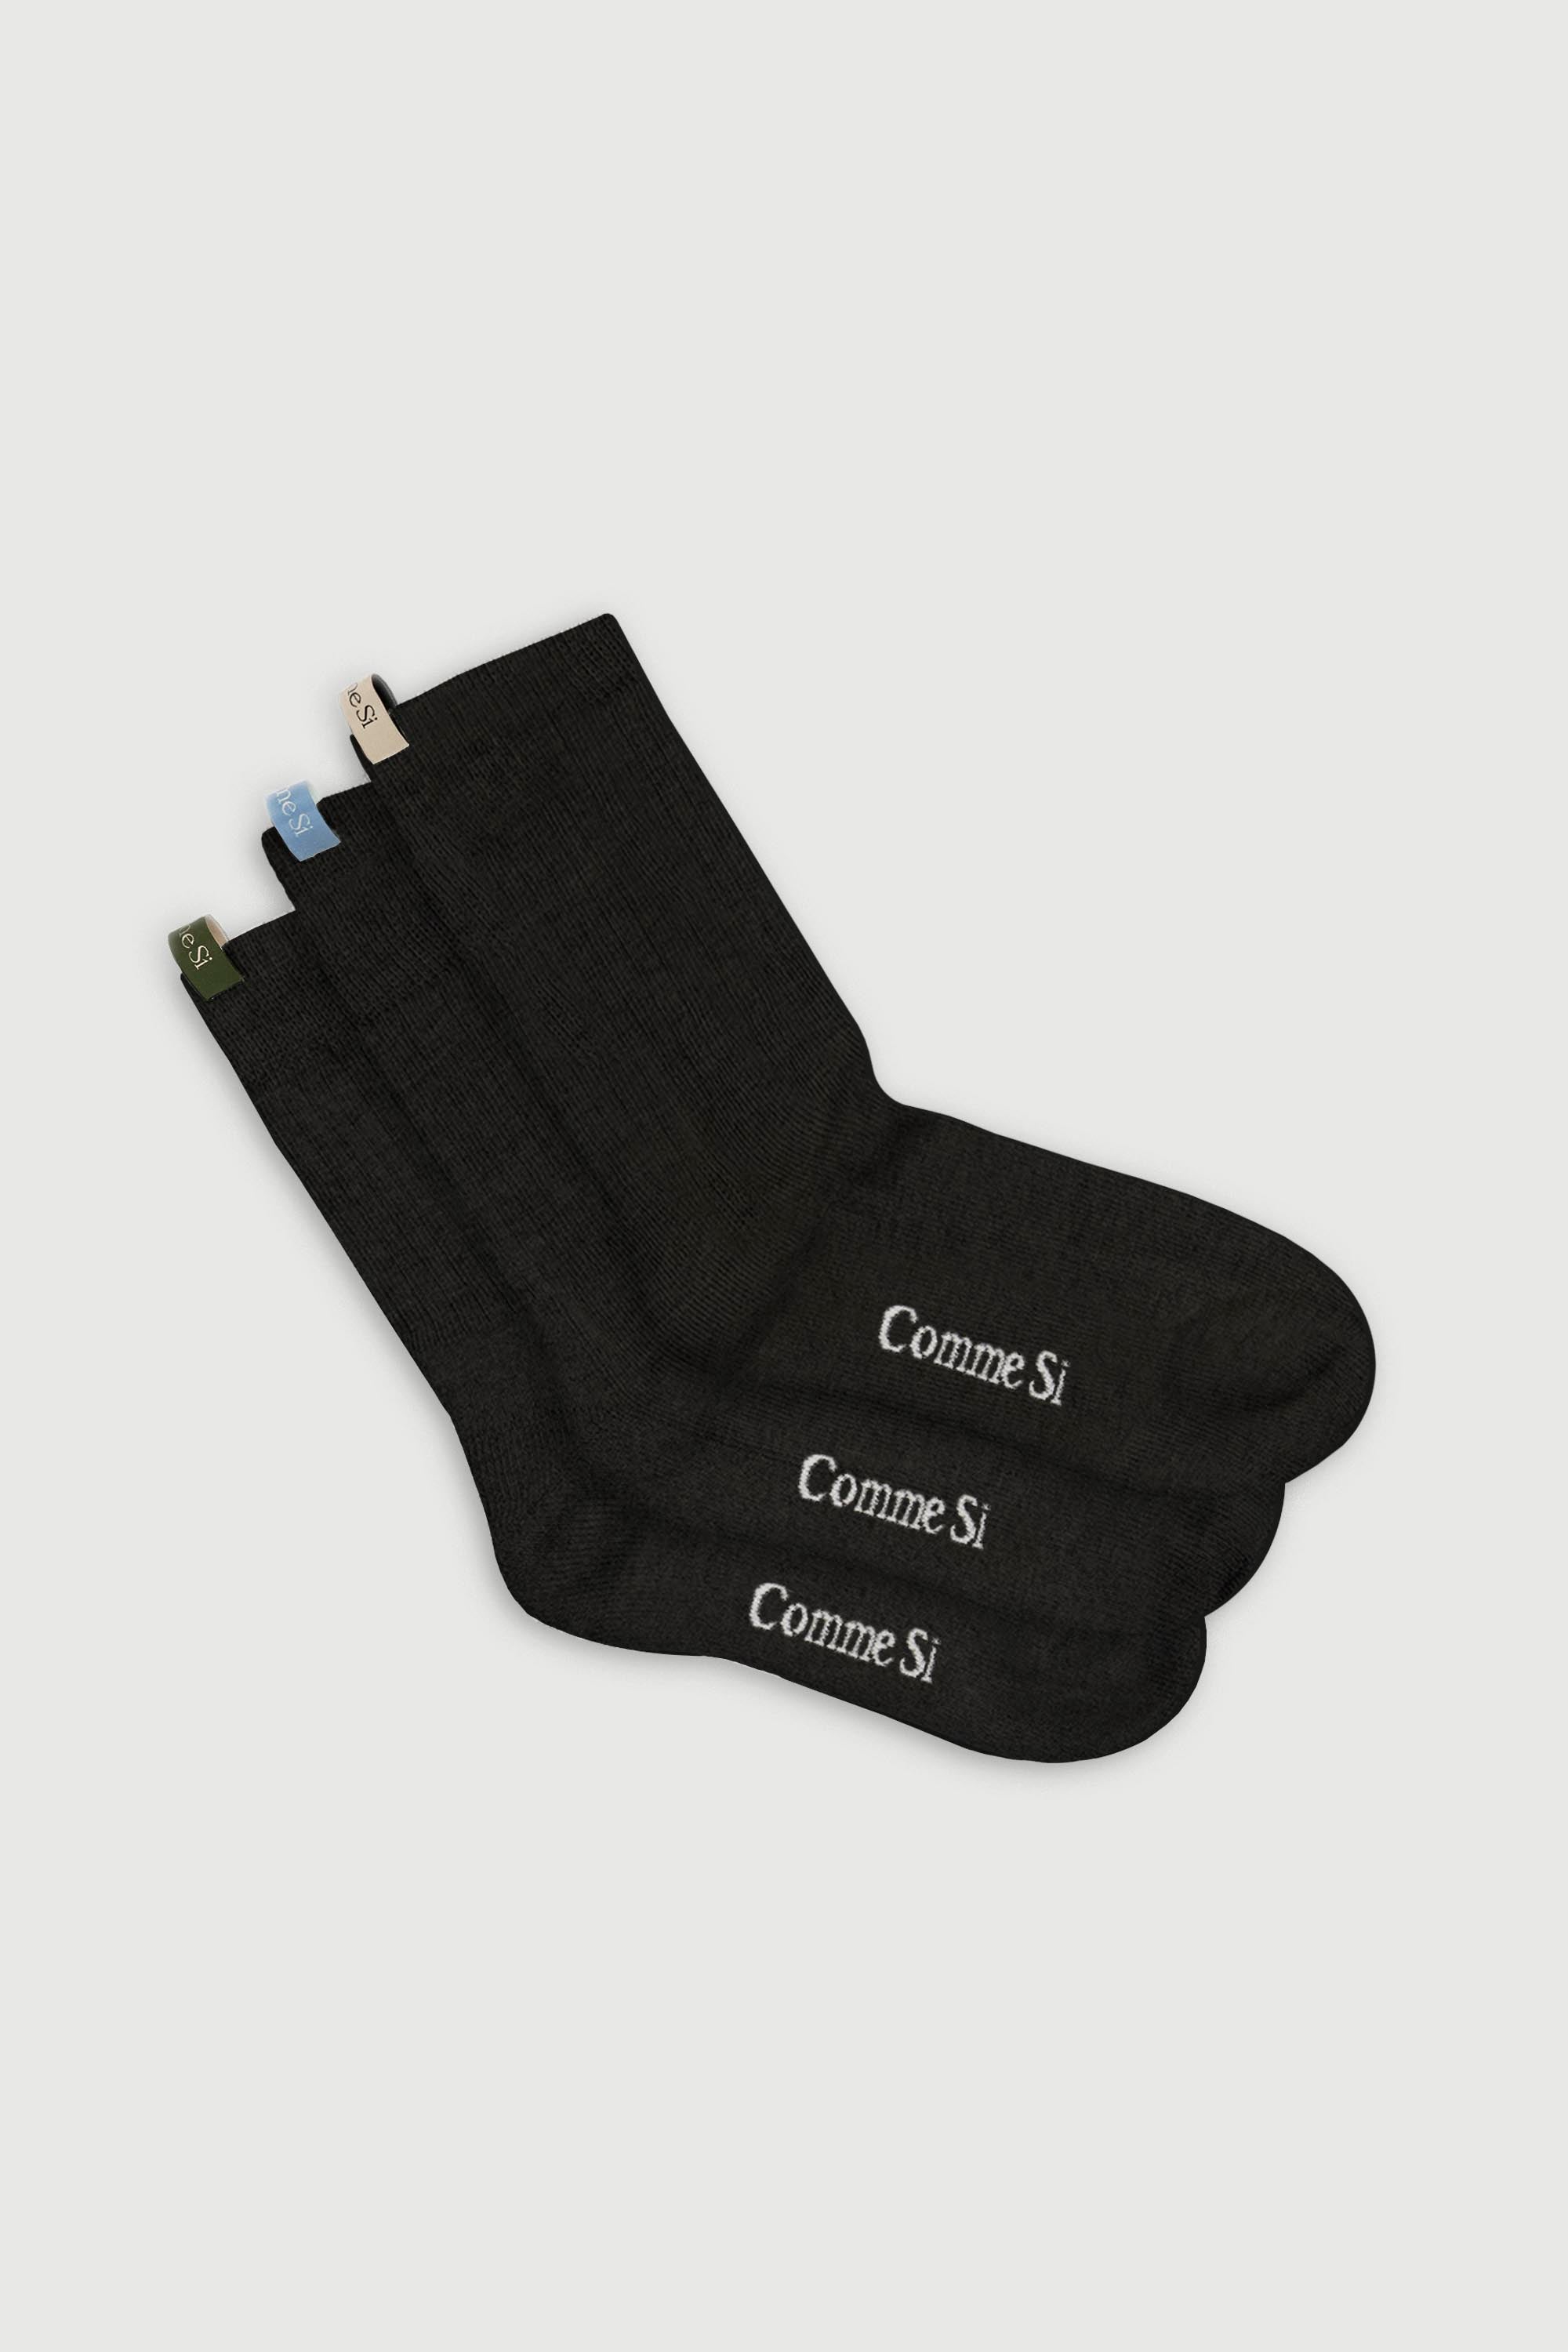 The Tube Sock Trio, Black, GOTS certified Organic Cotton, by Comme Si